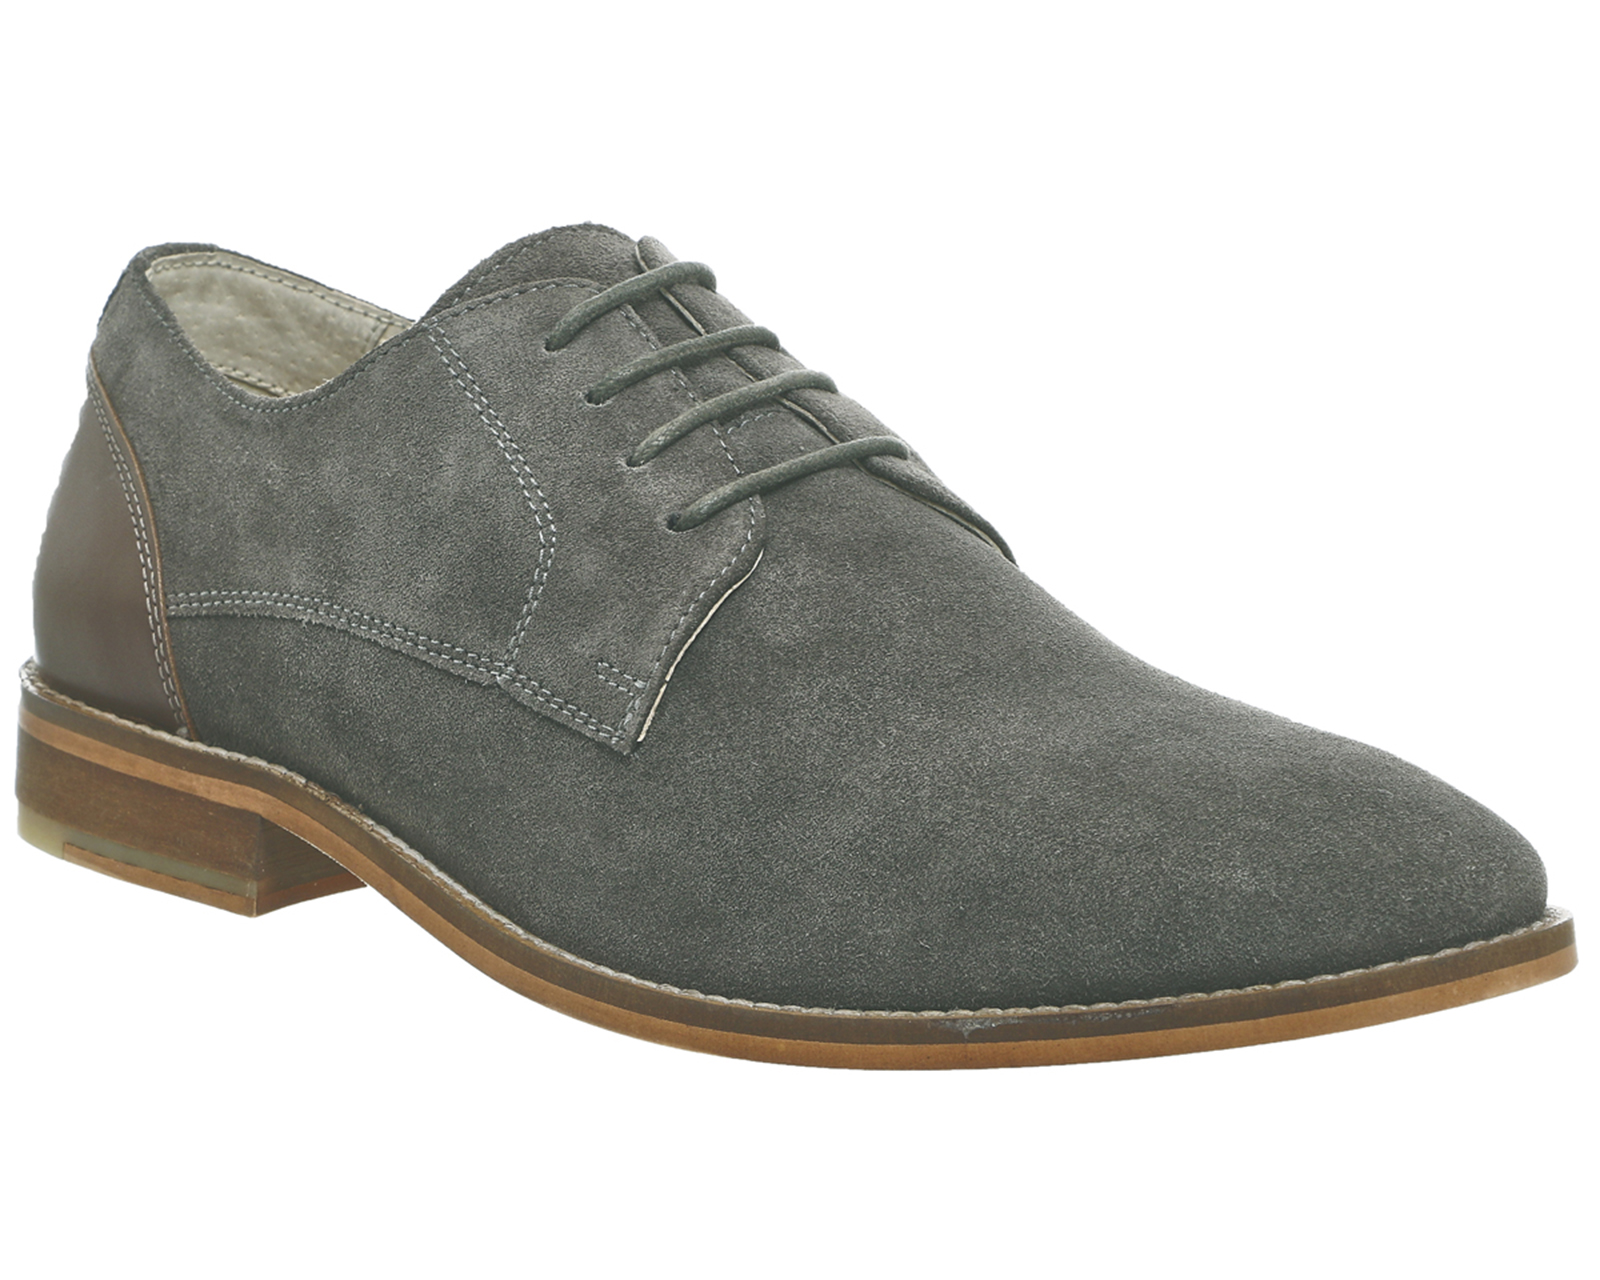 OFFICEFace GibsonGrey Suede Tan Leather